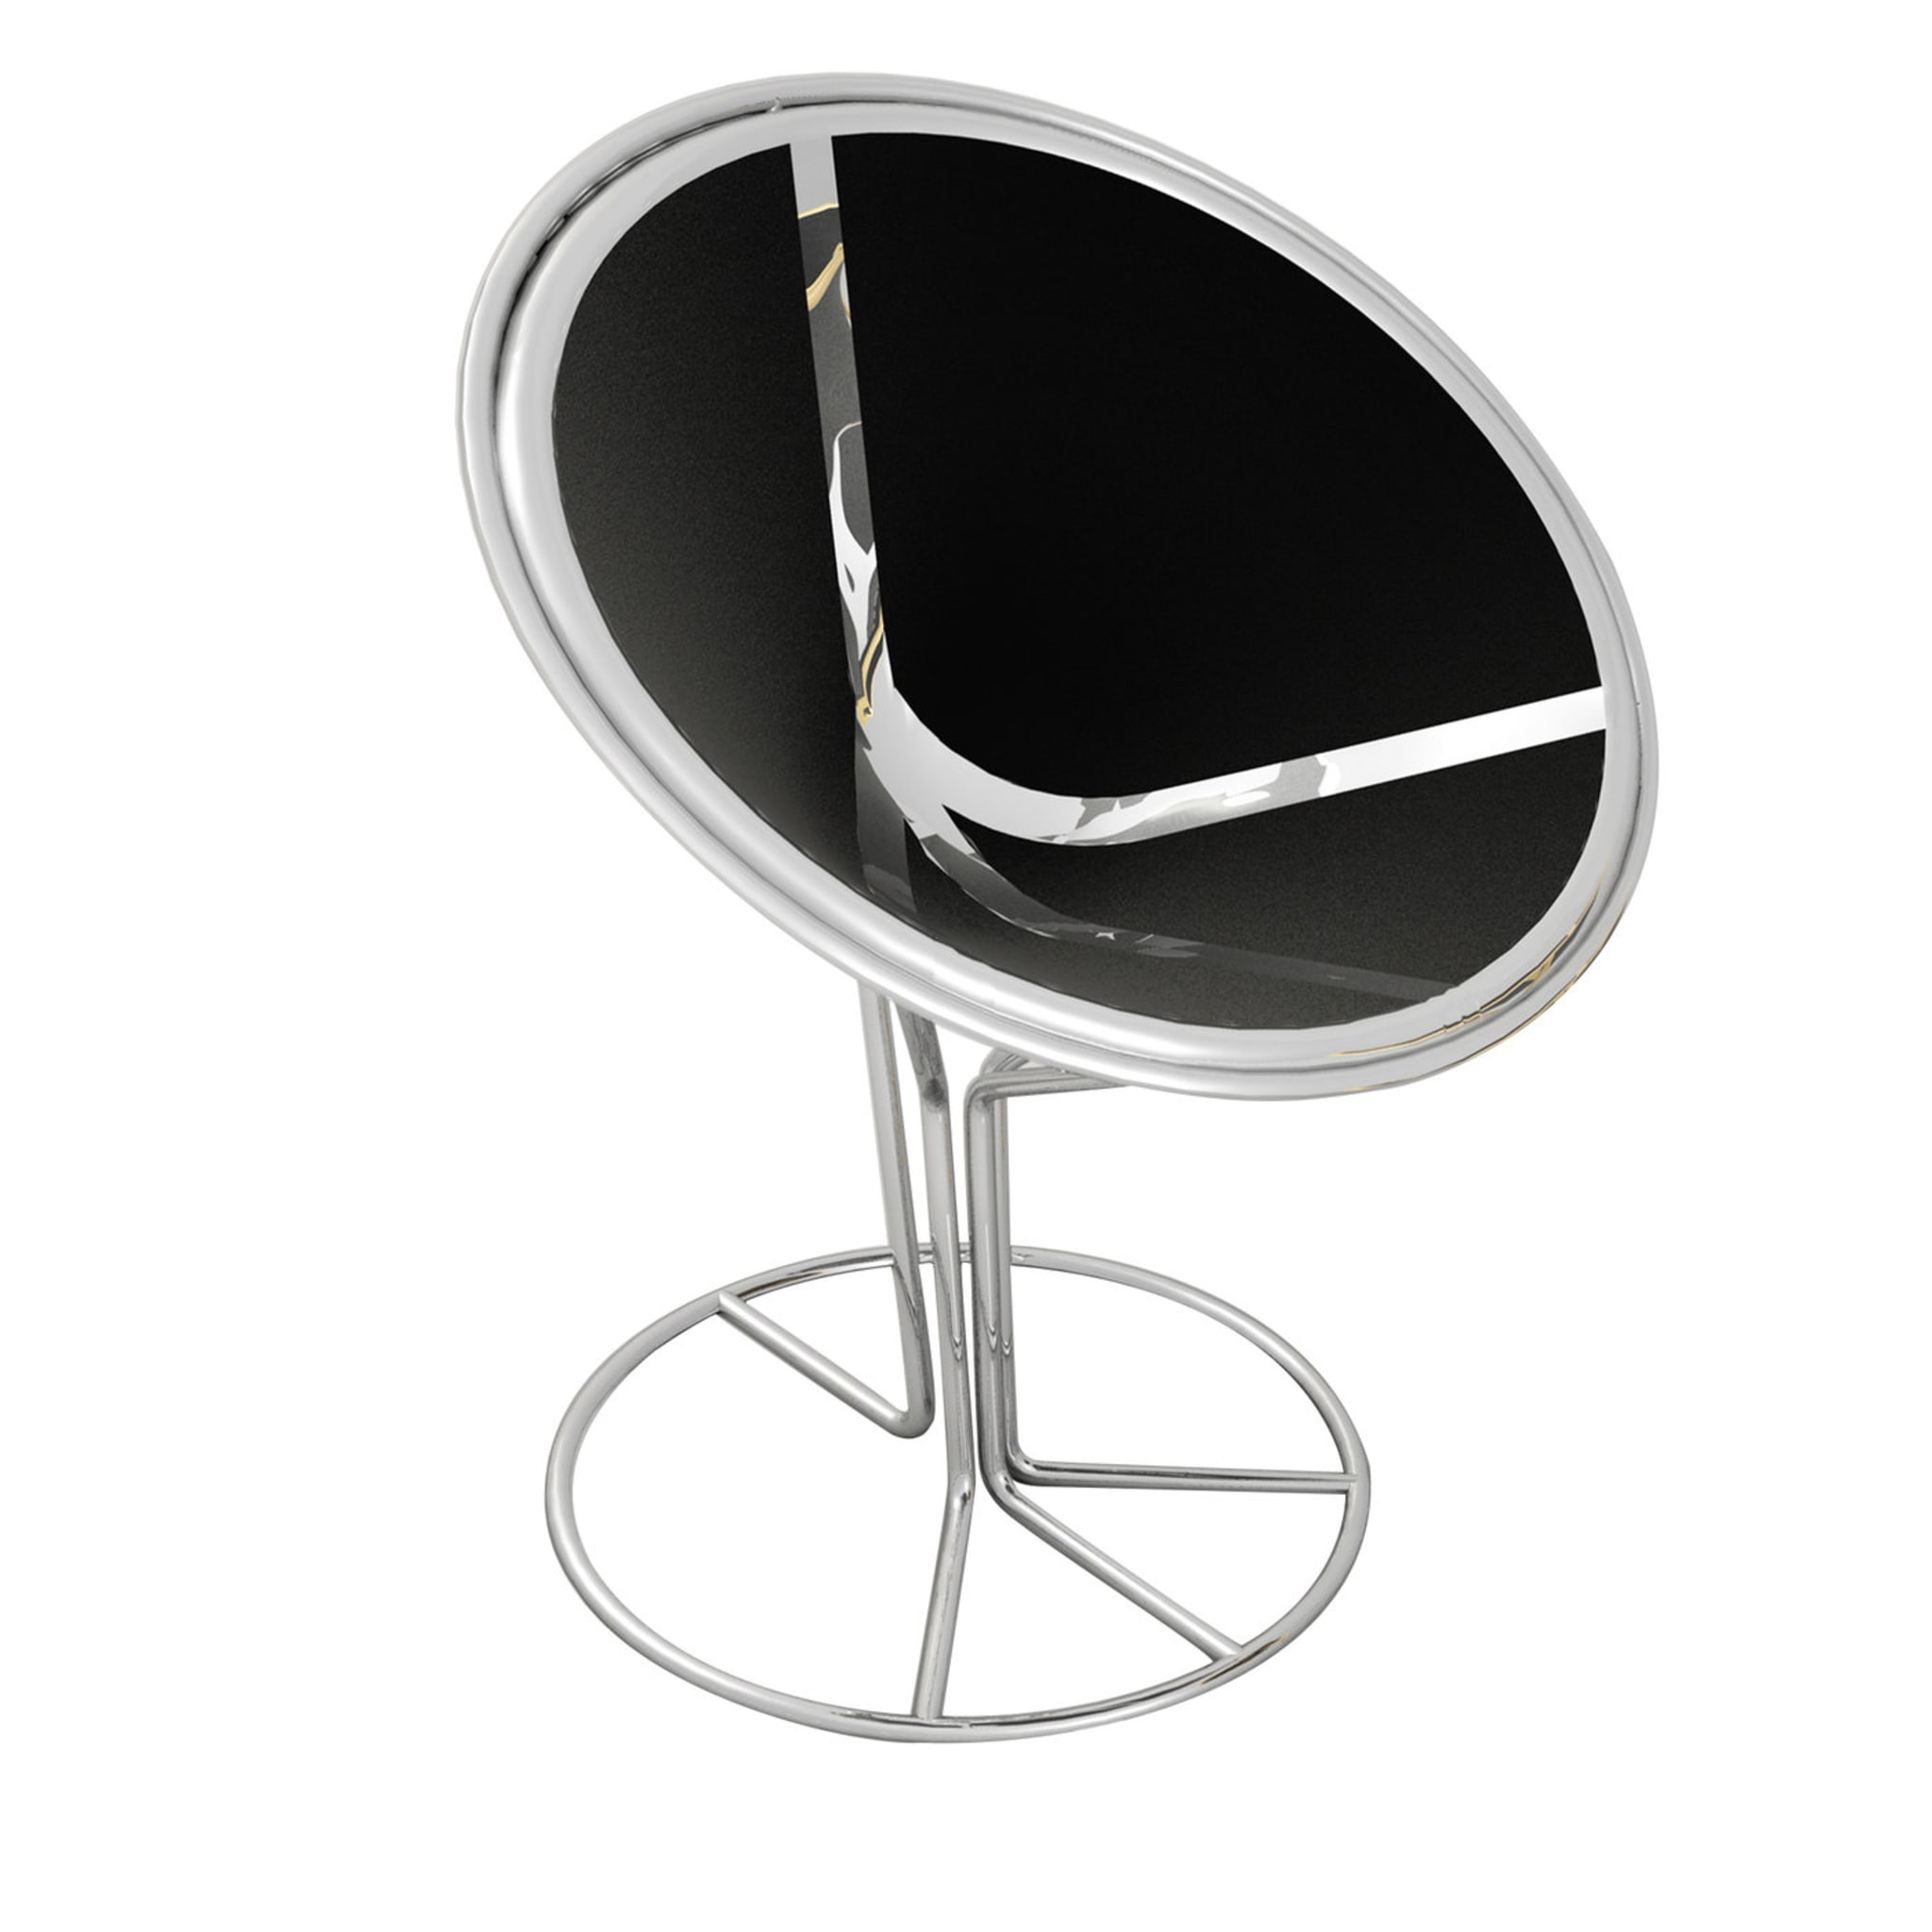 Pace Black and Silver Chair by Garilab by Piter Perbellini - Main view